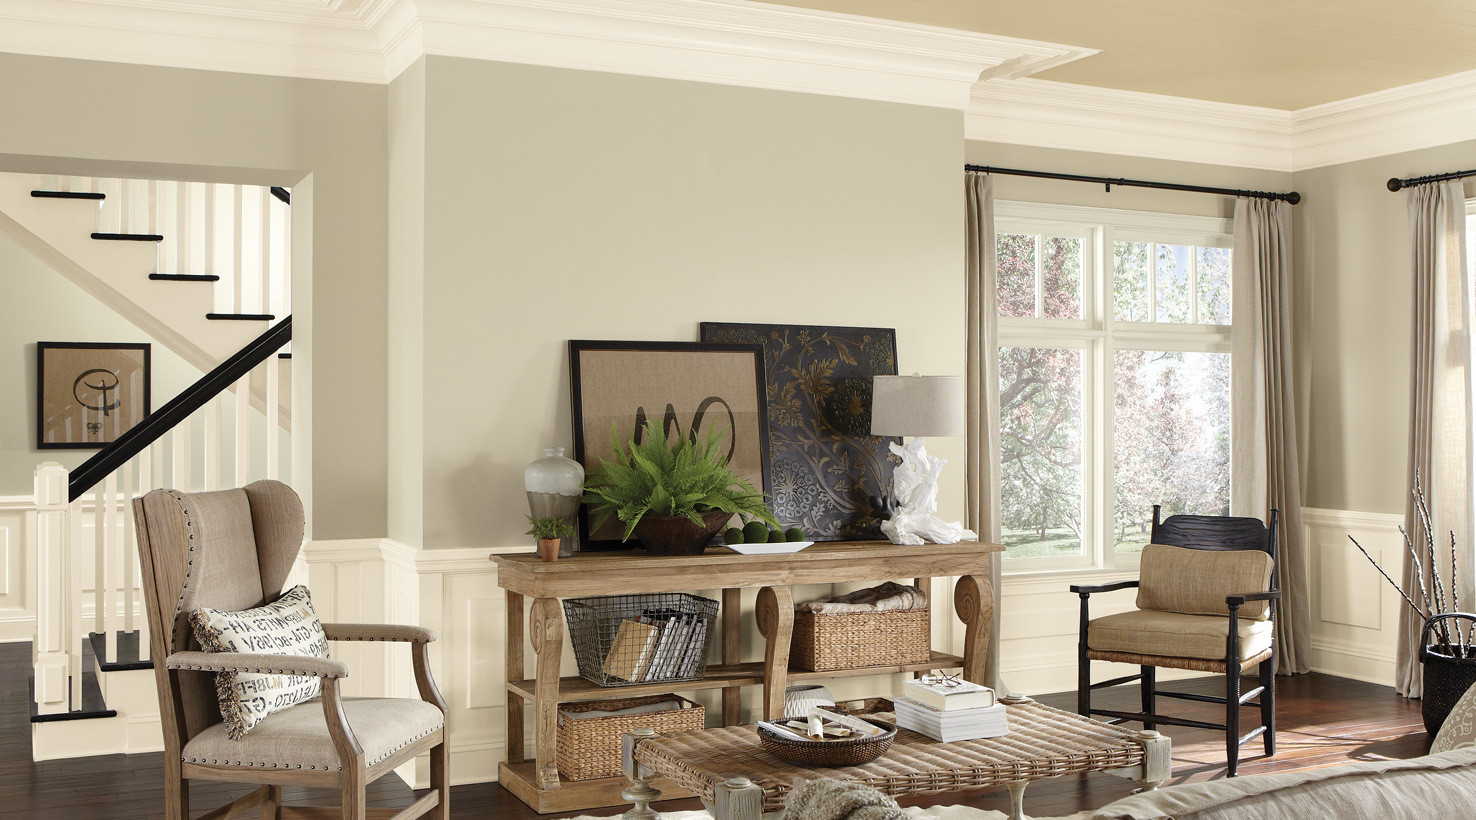 Colors To Paint Living Room
 Best Paint Color for Living Room Ideas to Decorate Living